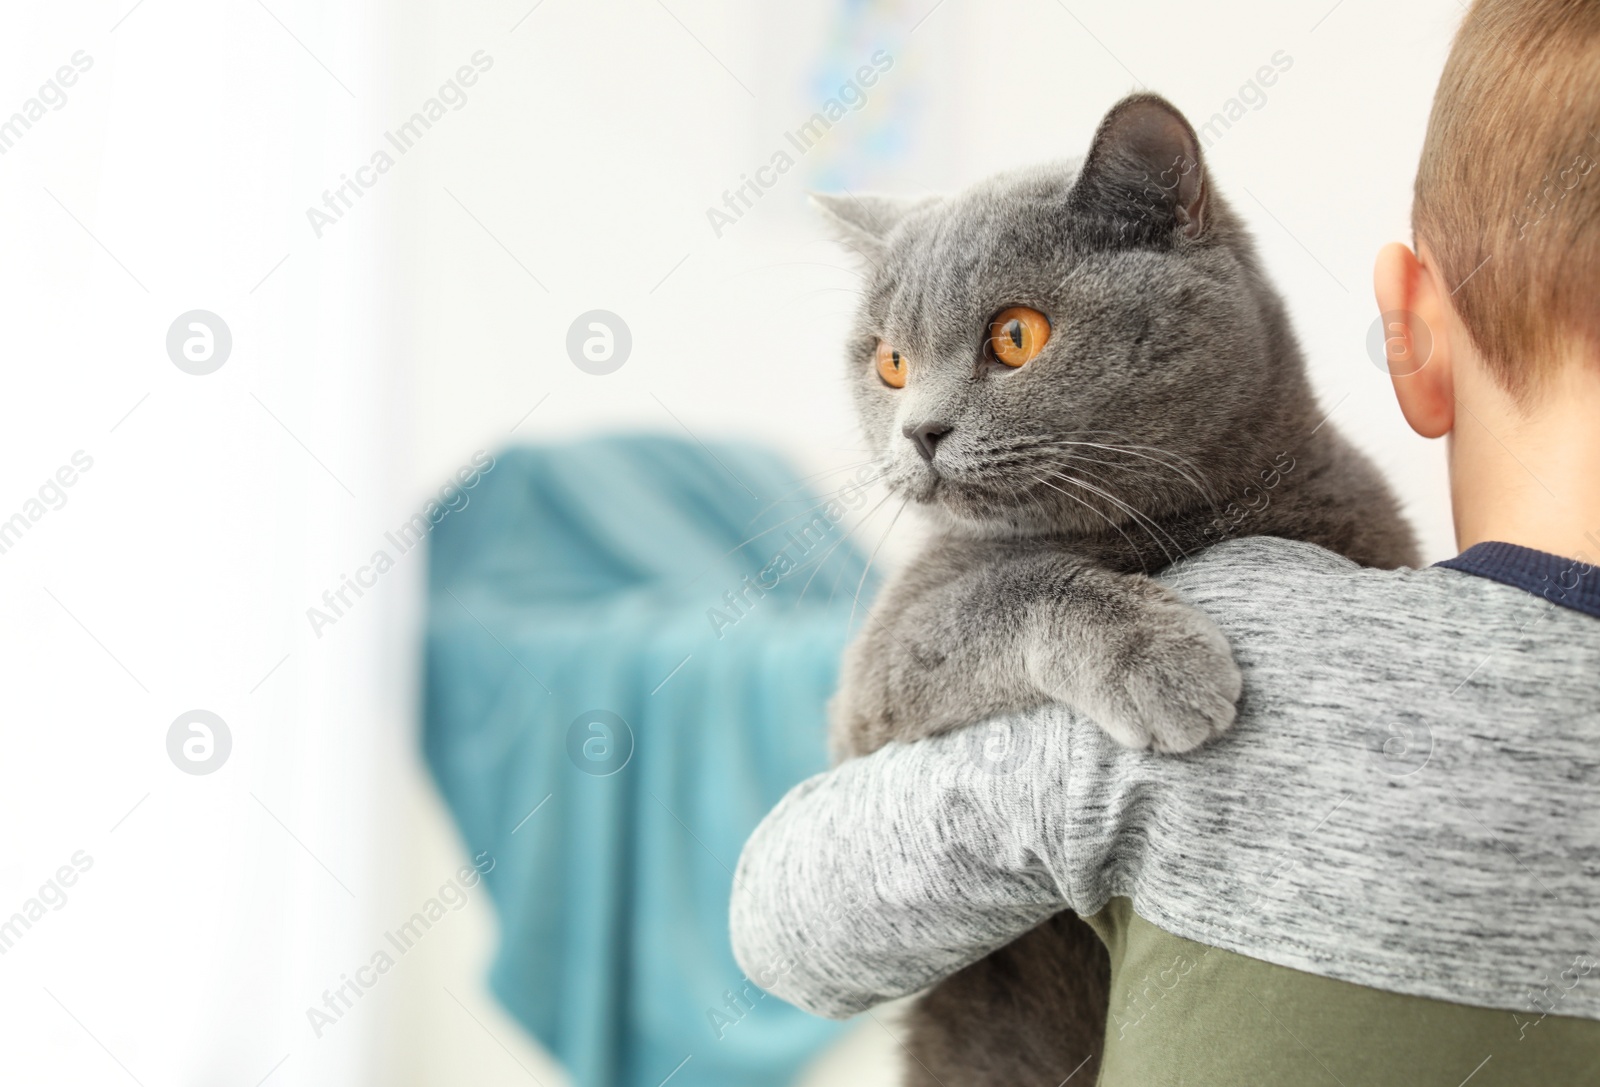 Photo of Little child holding cute cat at home